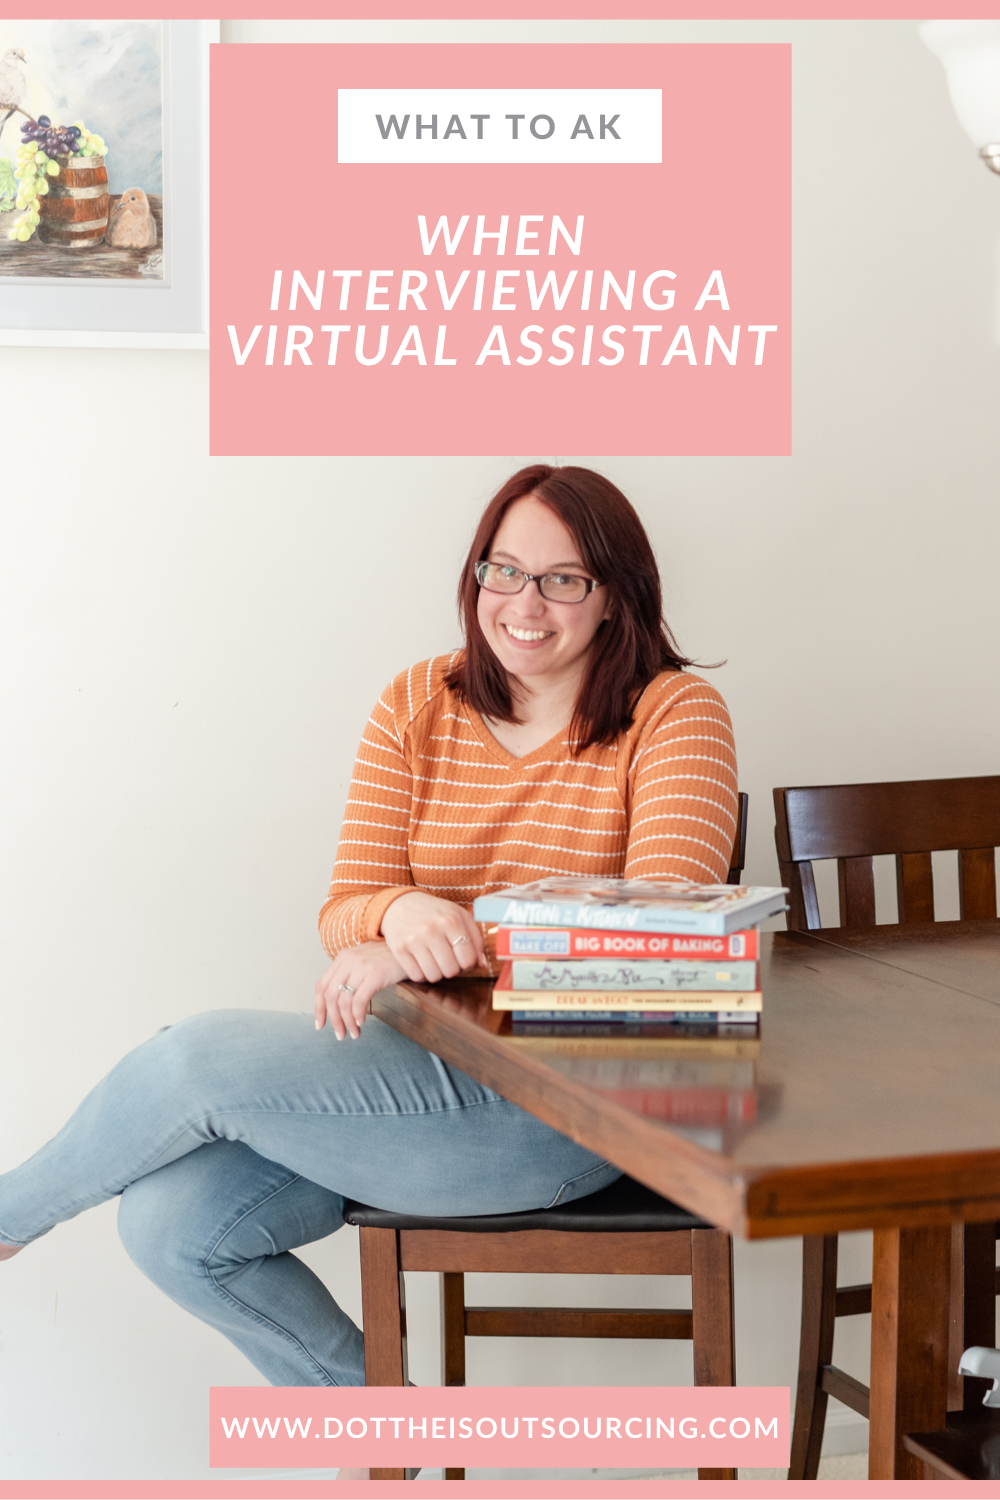 What to ask when interviewing a virtual assistant